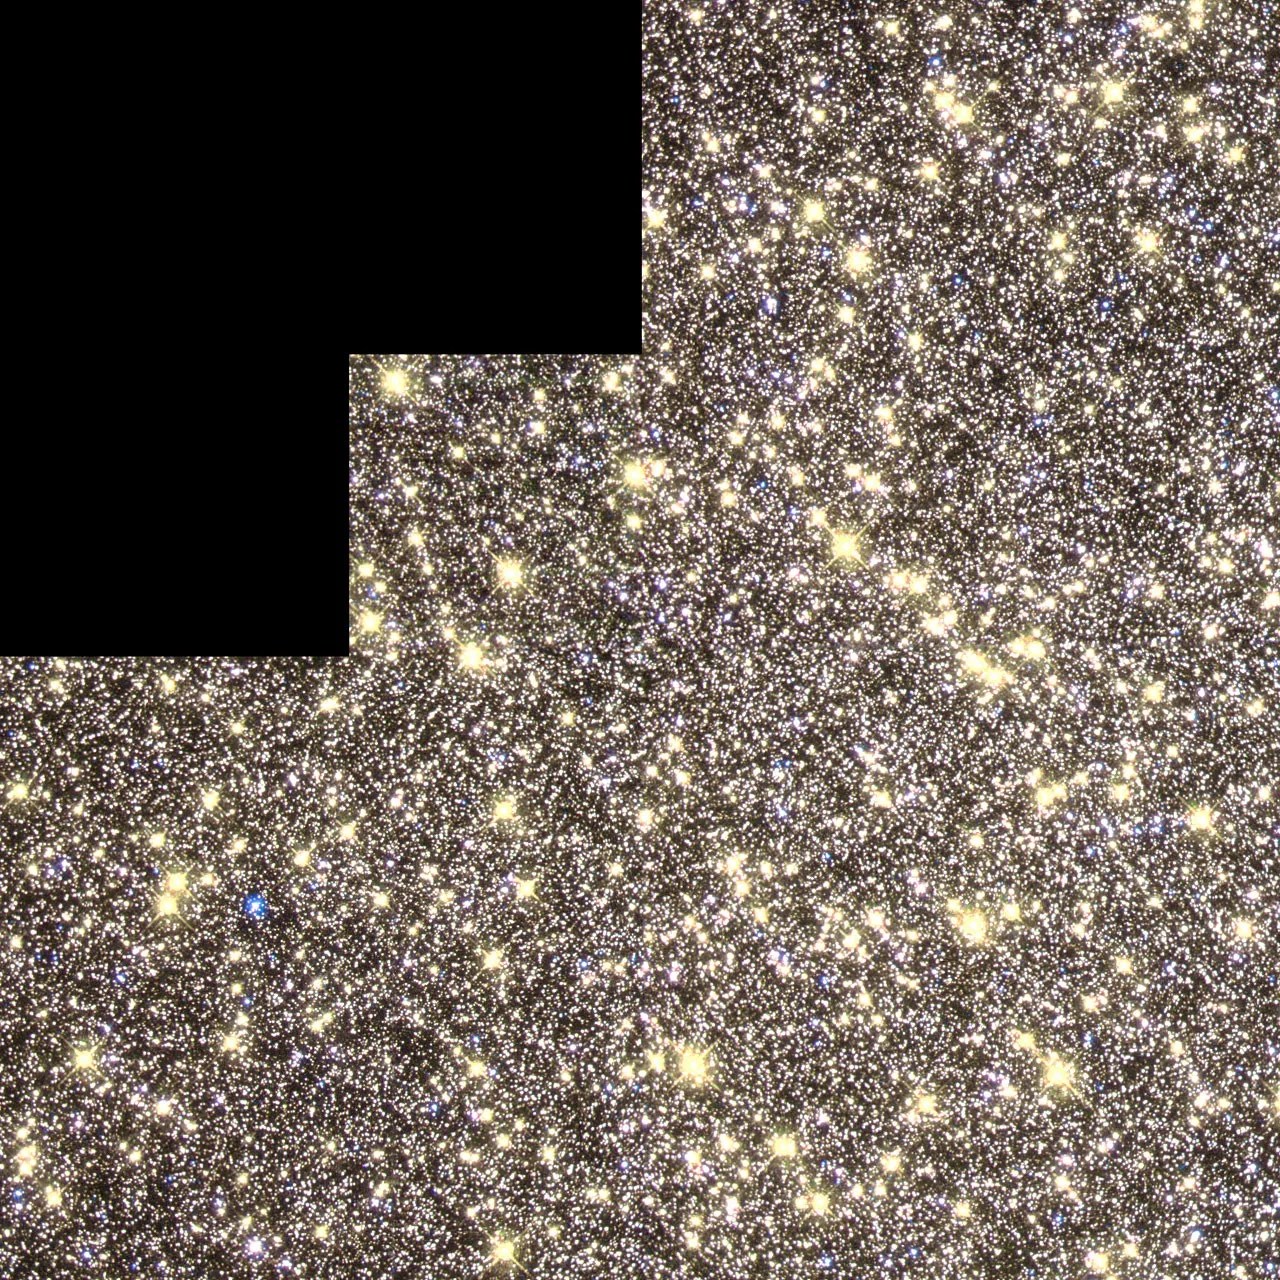 A stair-shaped image of C80 caused by design of WFPC2 shows a section of the cluster thick with yellow, white and the occasional blue star.